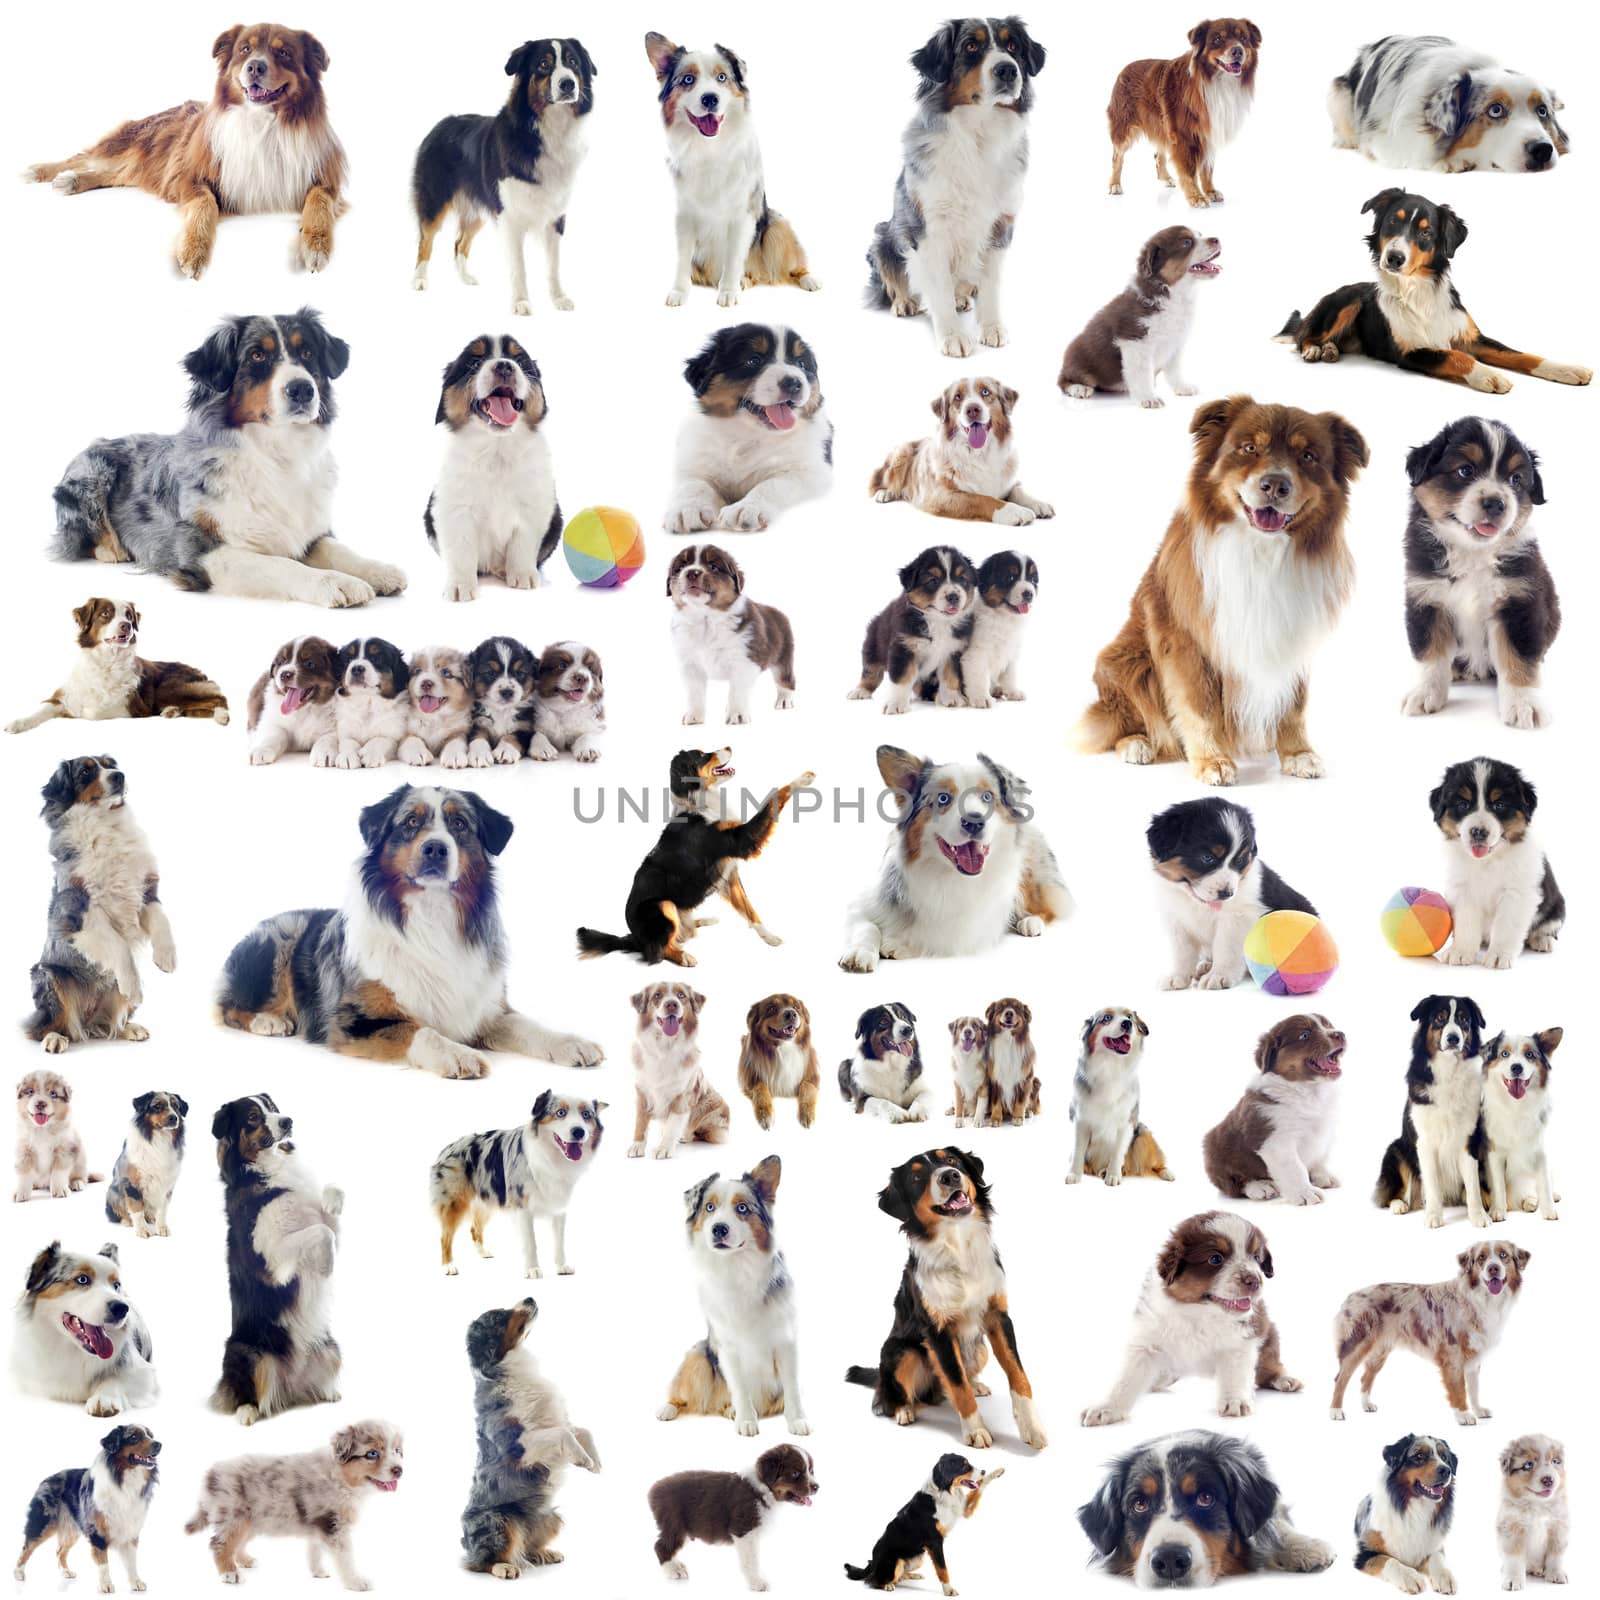 group of purebred australian shepherd  in front of white background